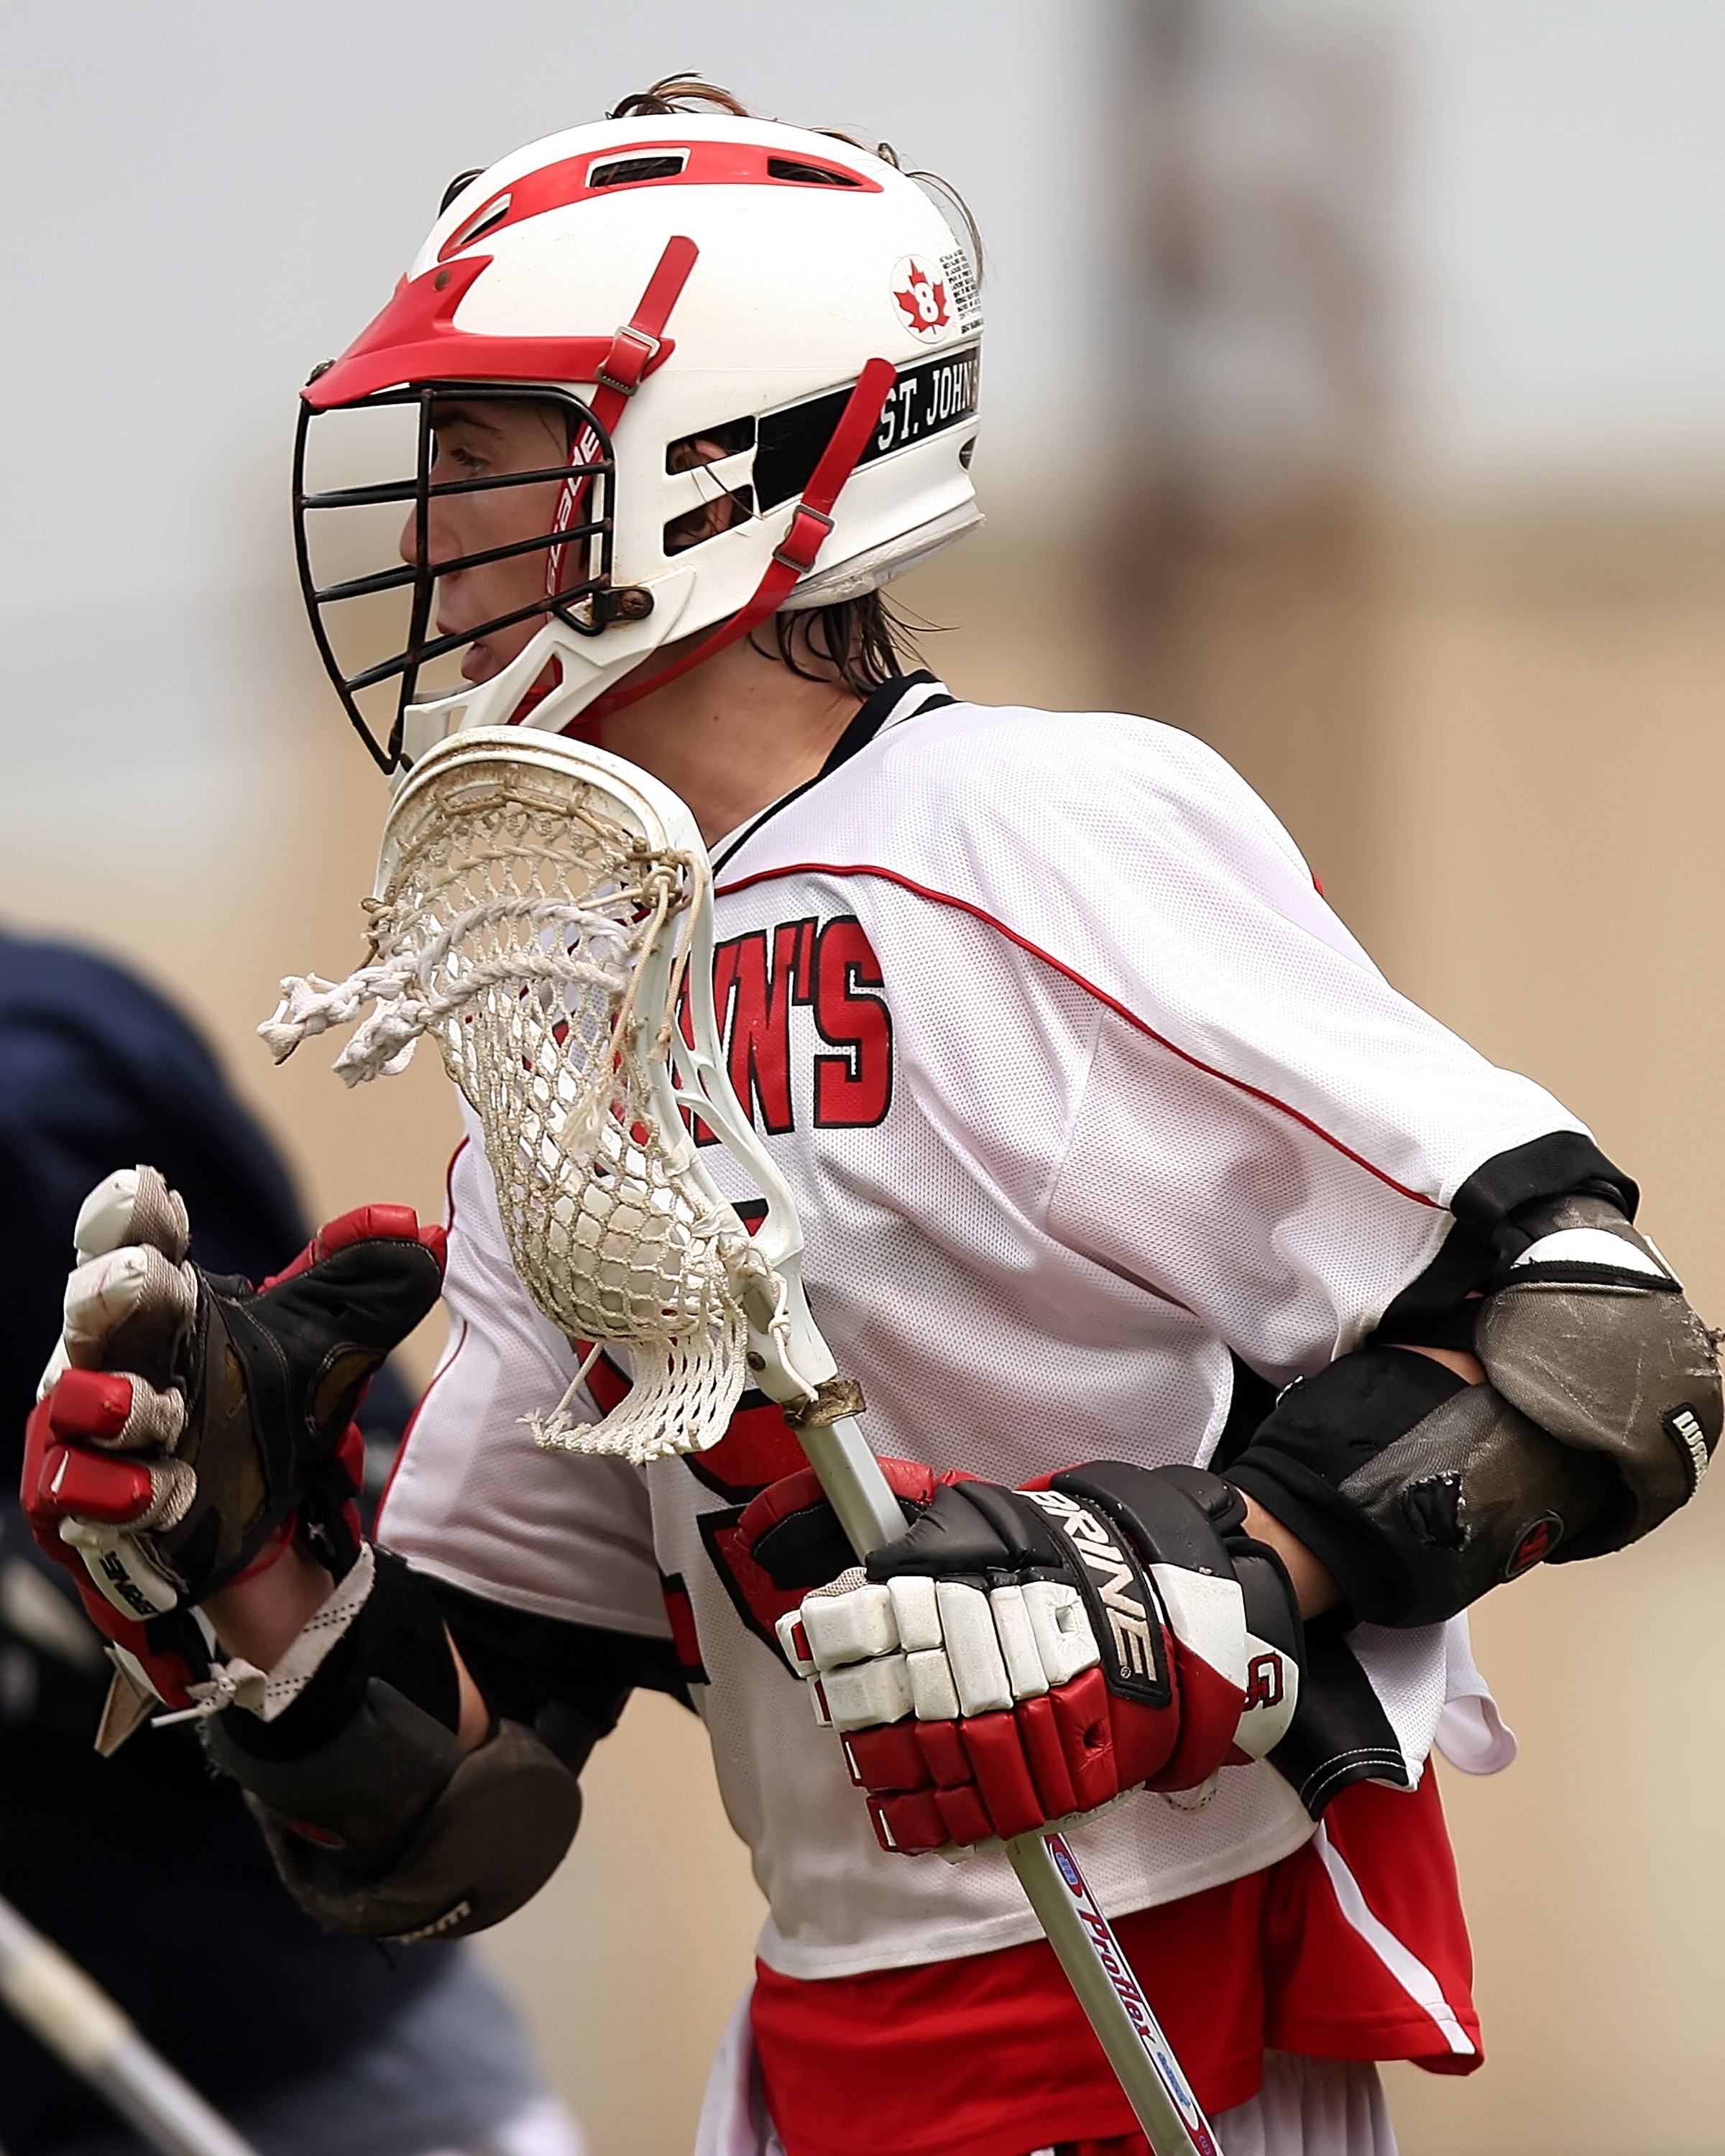 Man wearing white and red lacrosse uniform photo